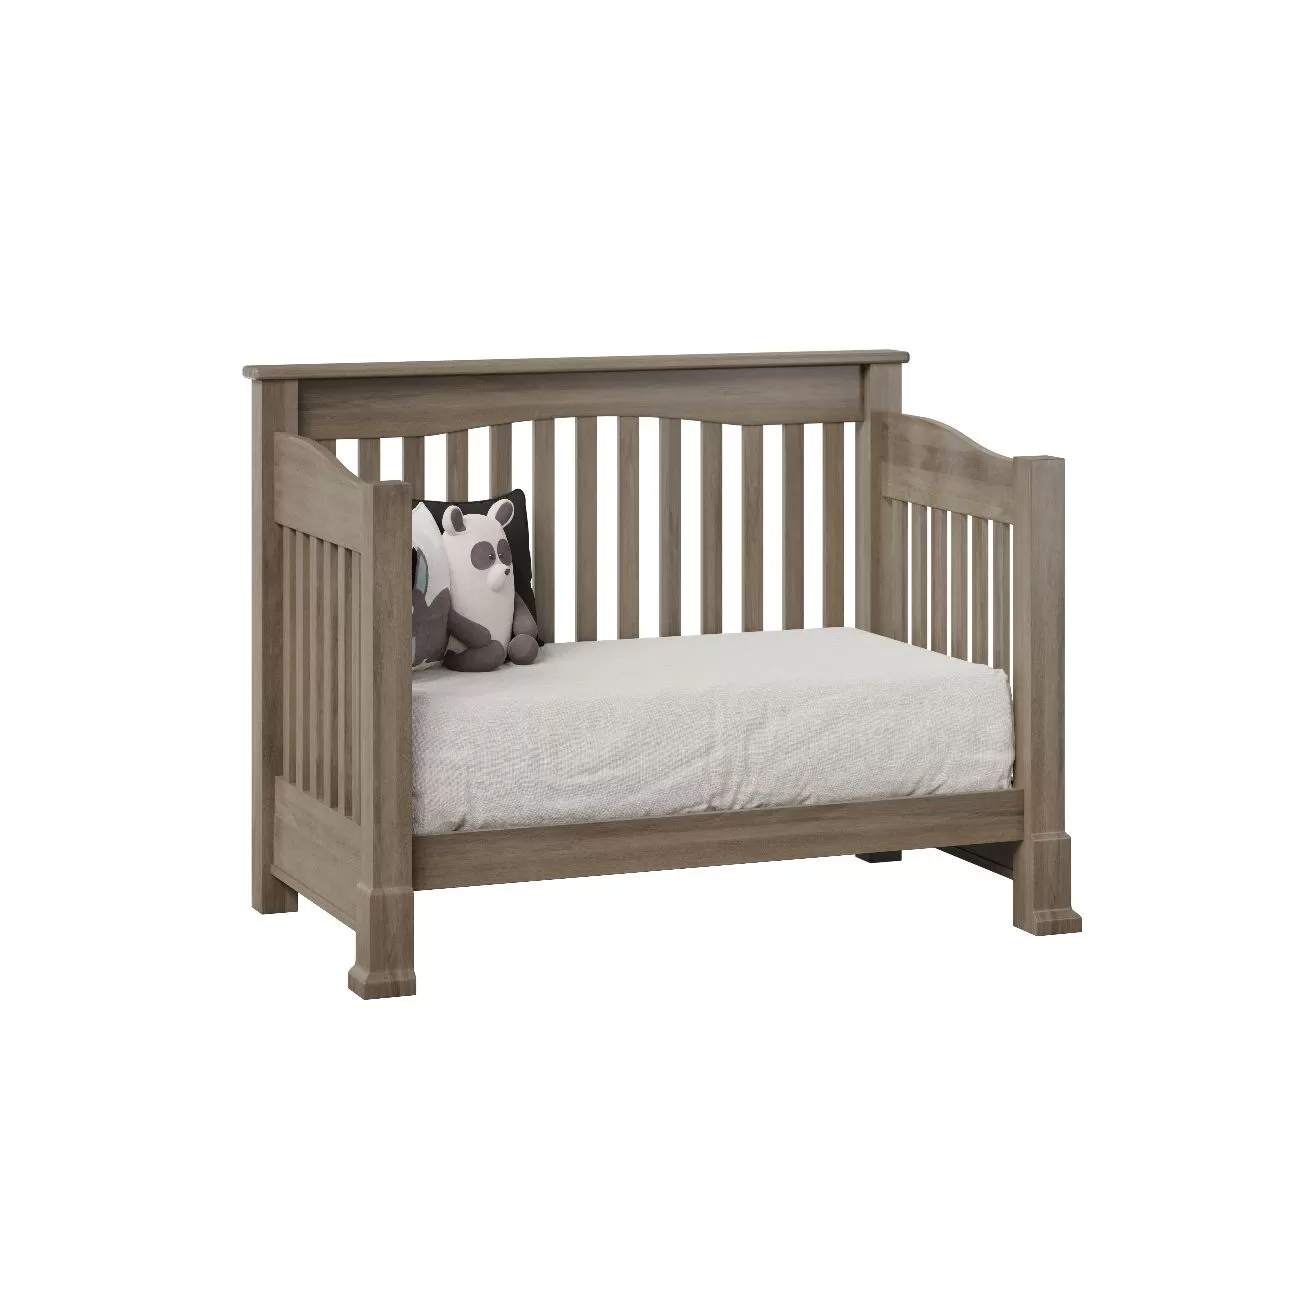 Mackenzie 1401a toddler bed brown maple pcl mineral